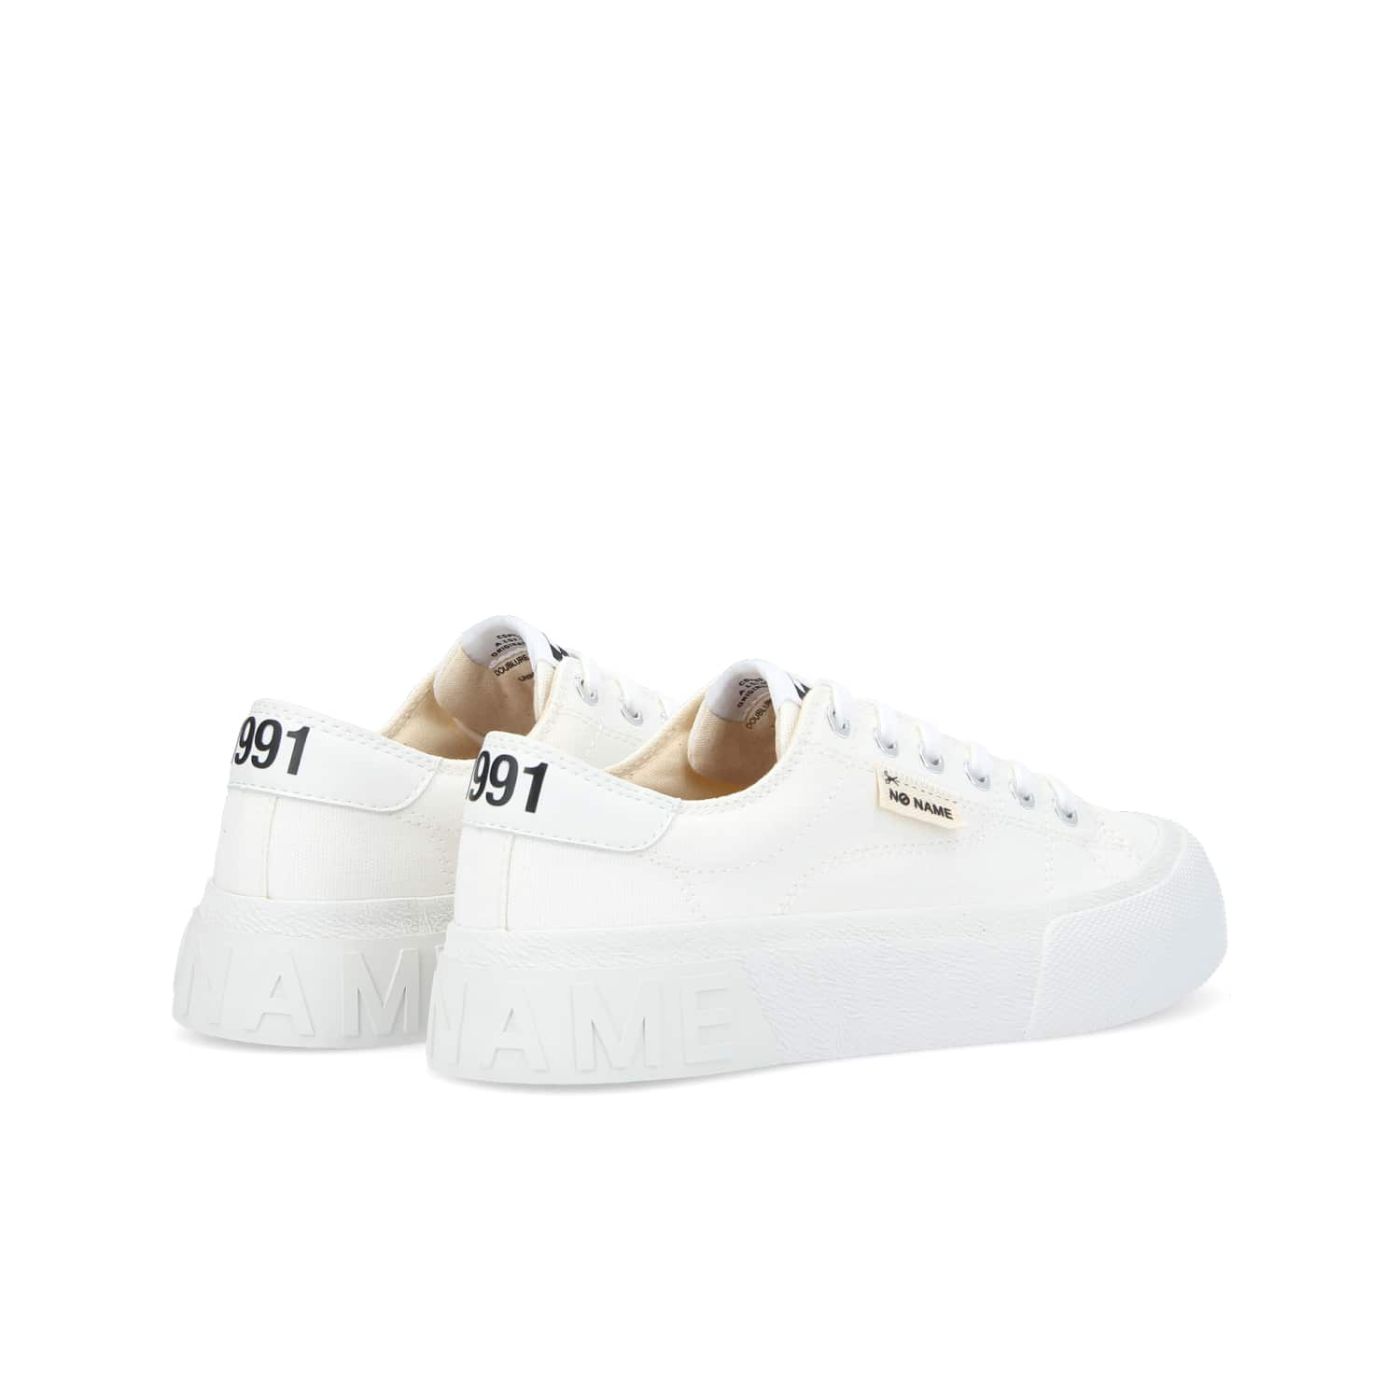 RESET SNEAKER W - CANVAS RECYCLED - WHITE